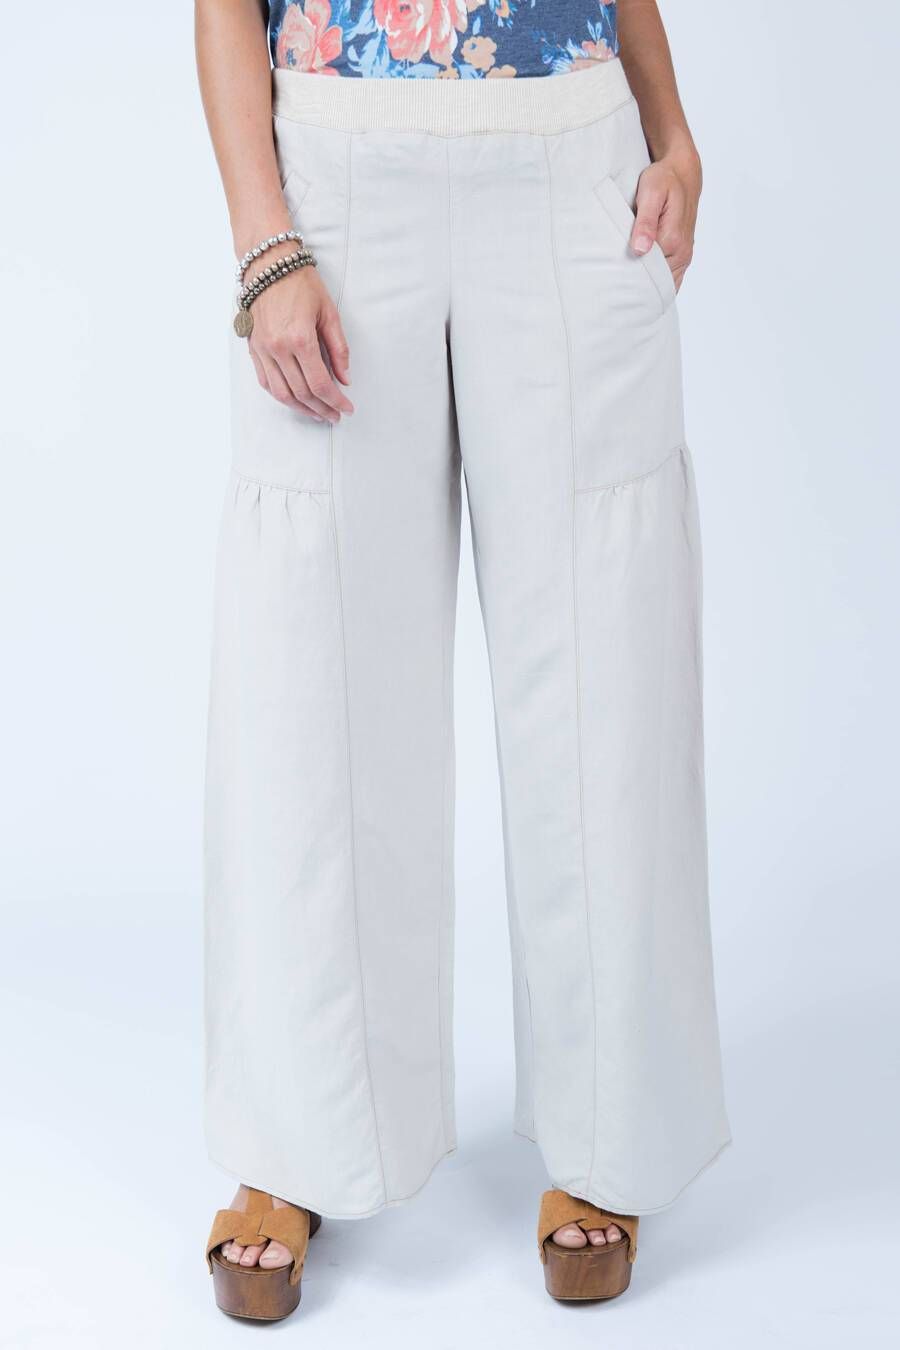 WHITE LINEN PANT BY IVY JANE